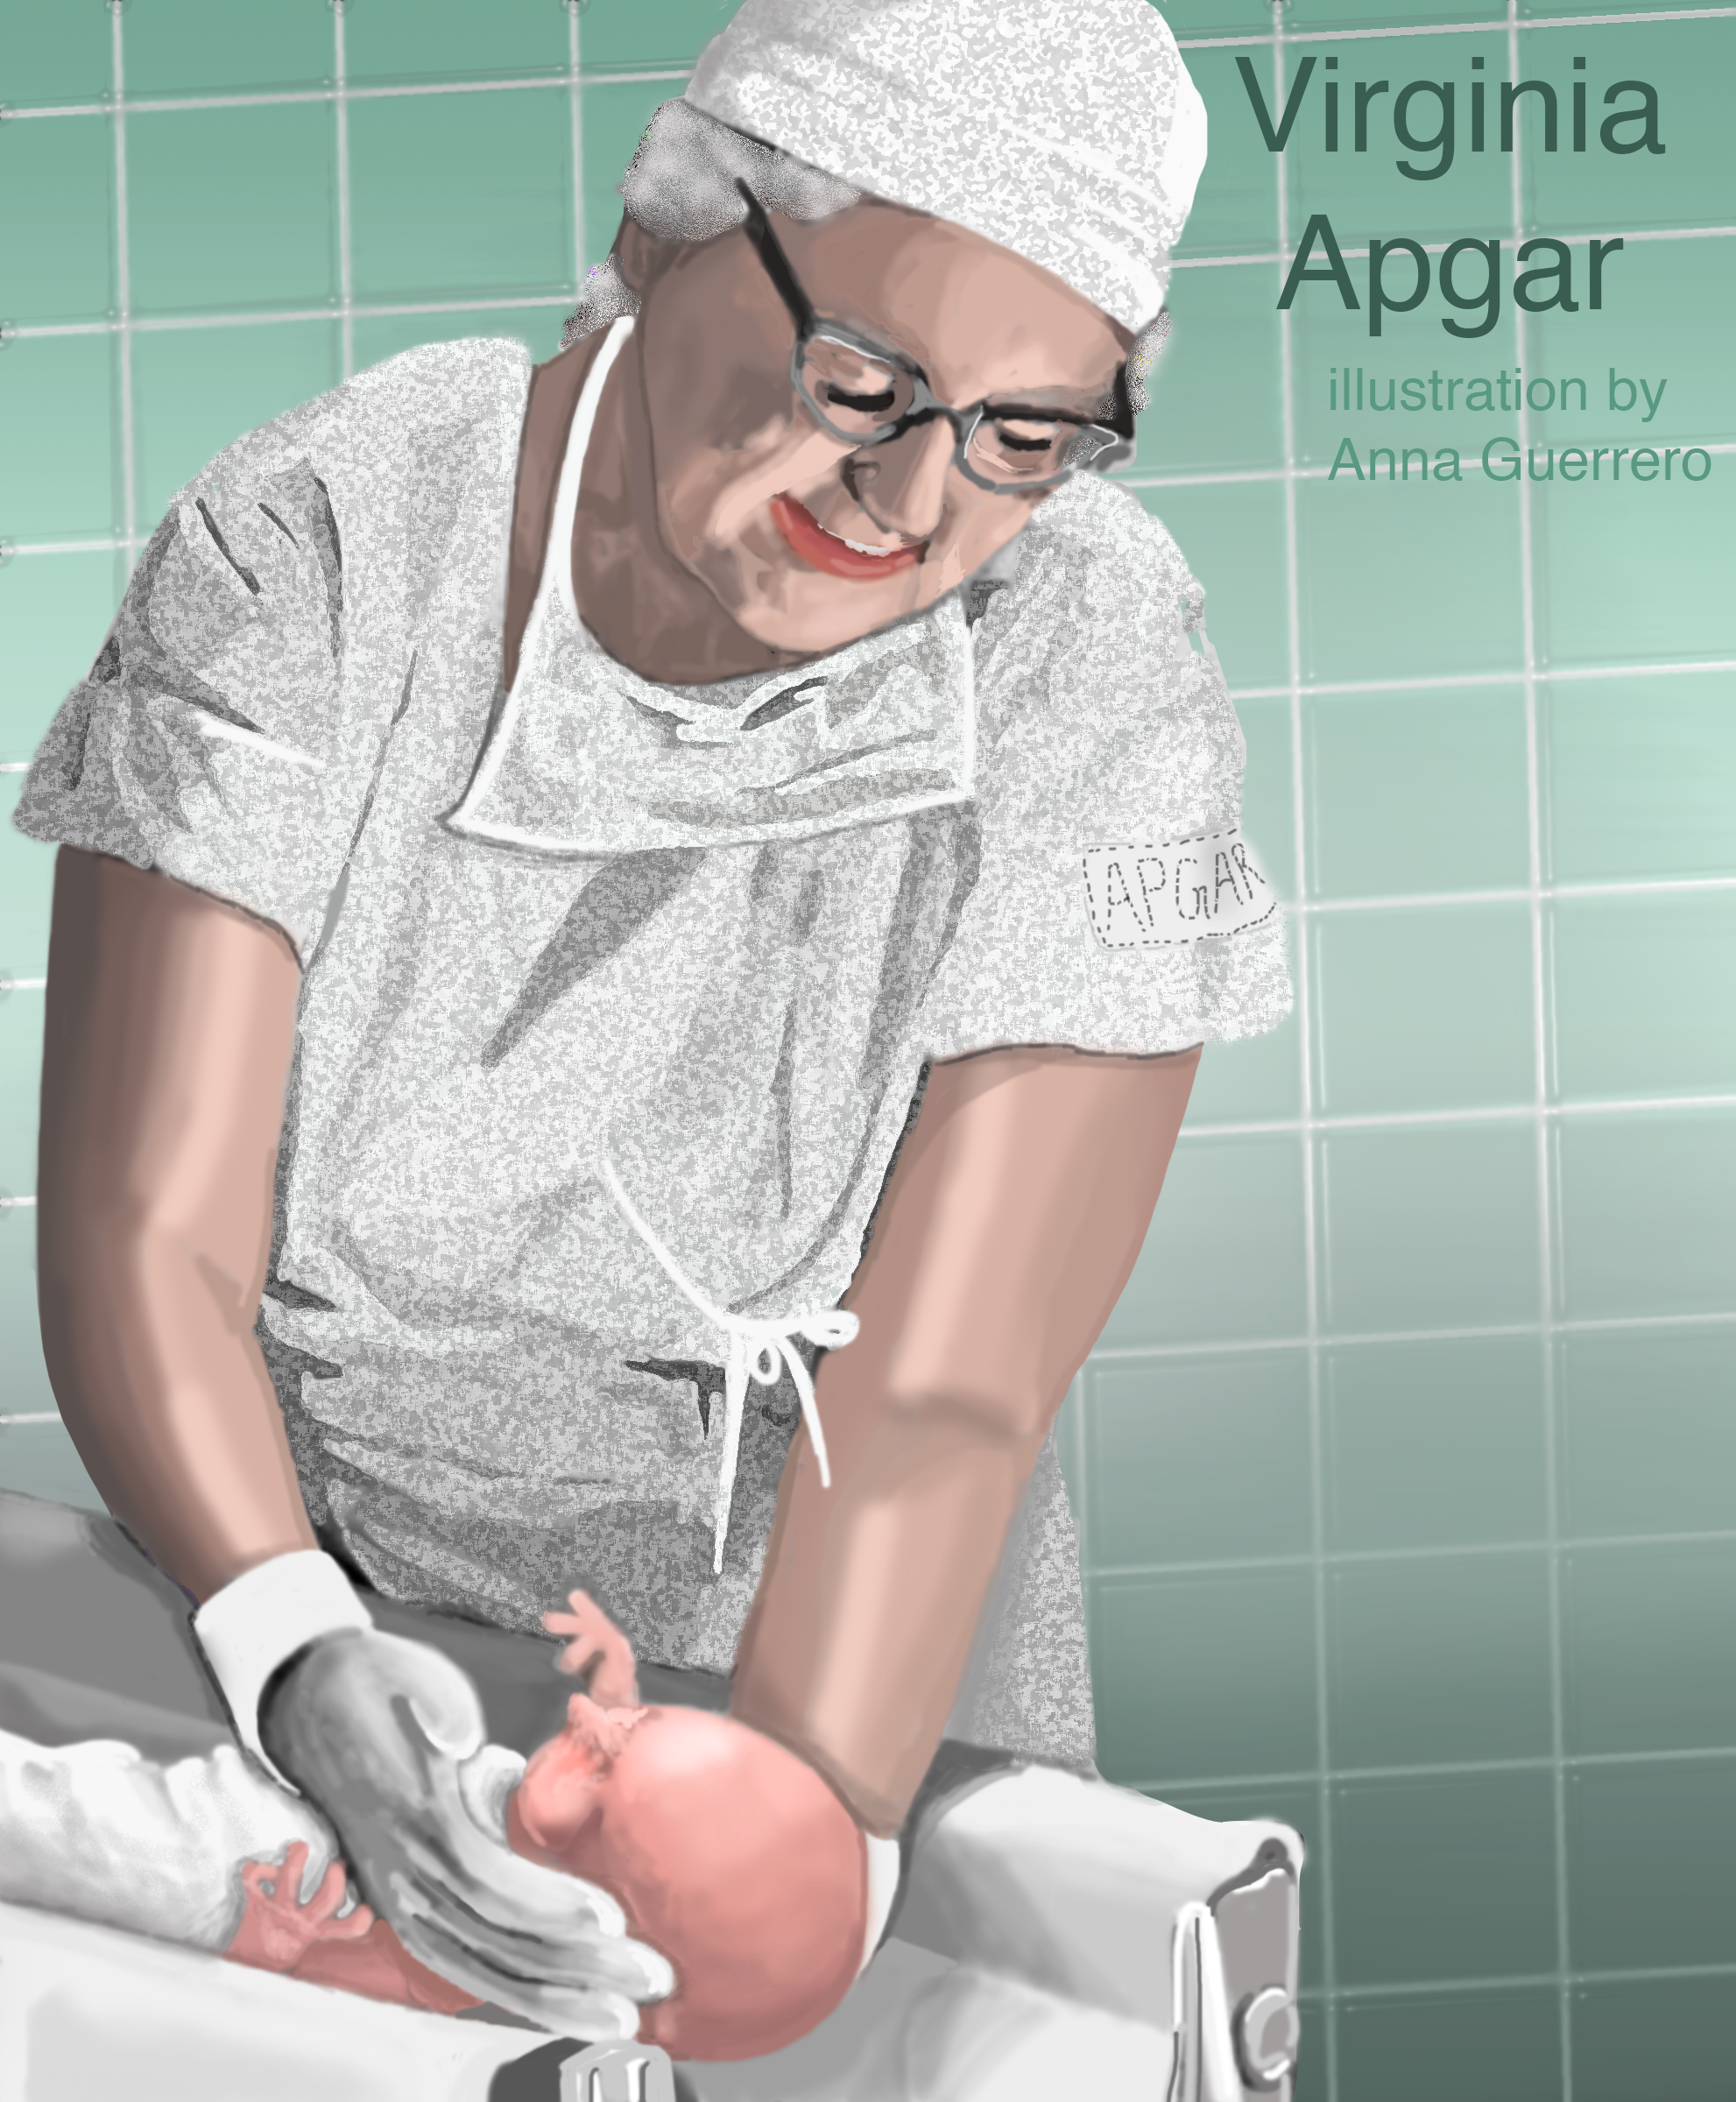 During the mid-twentieth century, Virginia Apgar worked as an obstetrical anesthesiologist and gave drugs to women that reduced their pain during childbirth in the US. In 1953, Apgar created a scoring system, called the Apgar score, that uses five measurements, including heart rate and breathing rate. The Apgar score evaluates newborn infants and determines who needs immediate medical attention. Apgar's work helped decrease infant mortality rates. As of 2020, hospitals around the world use the Apgar score.